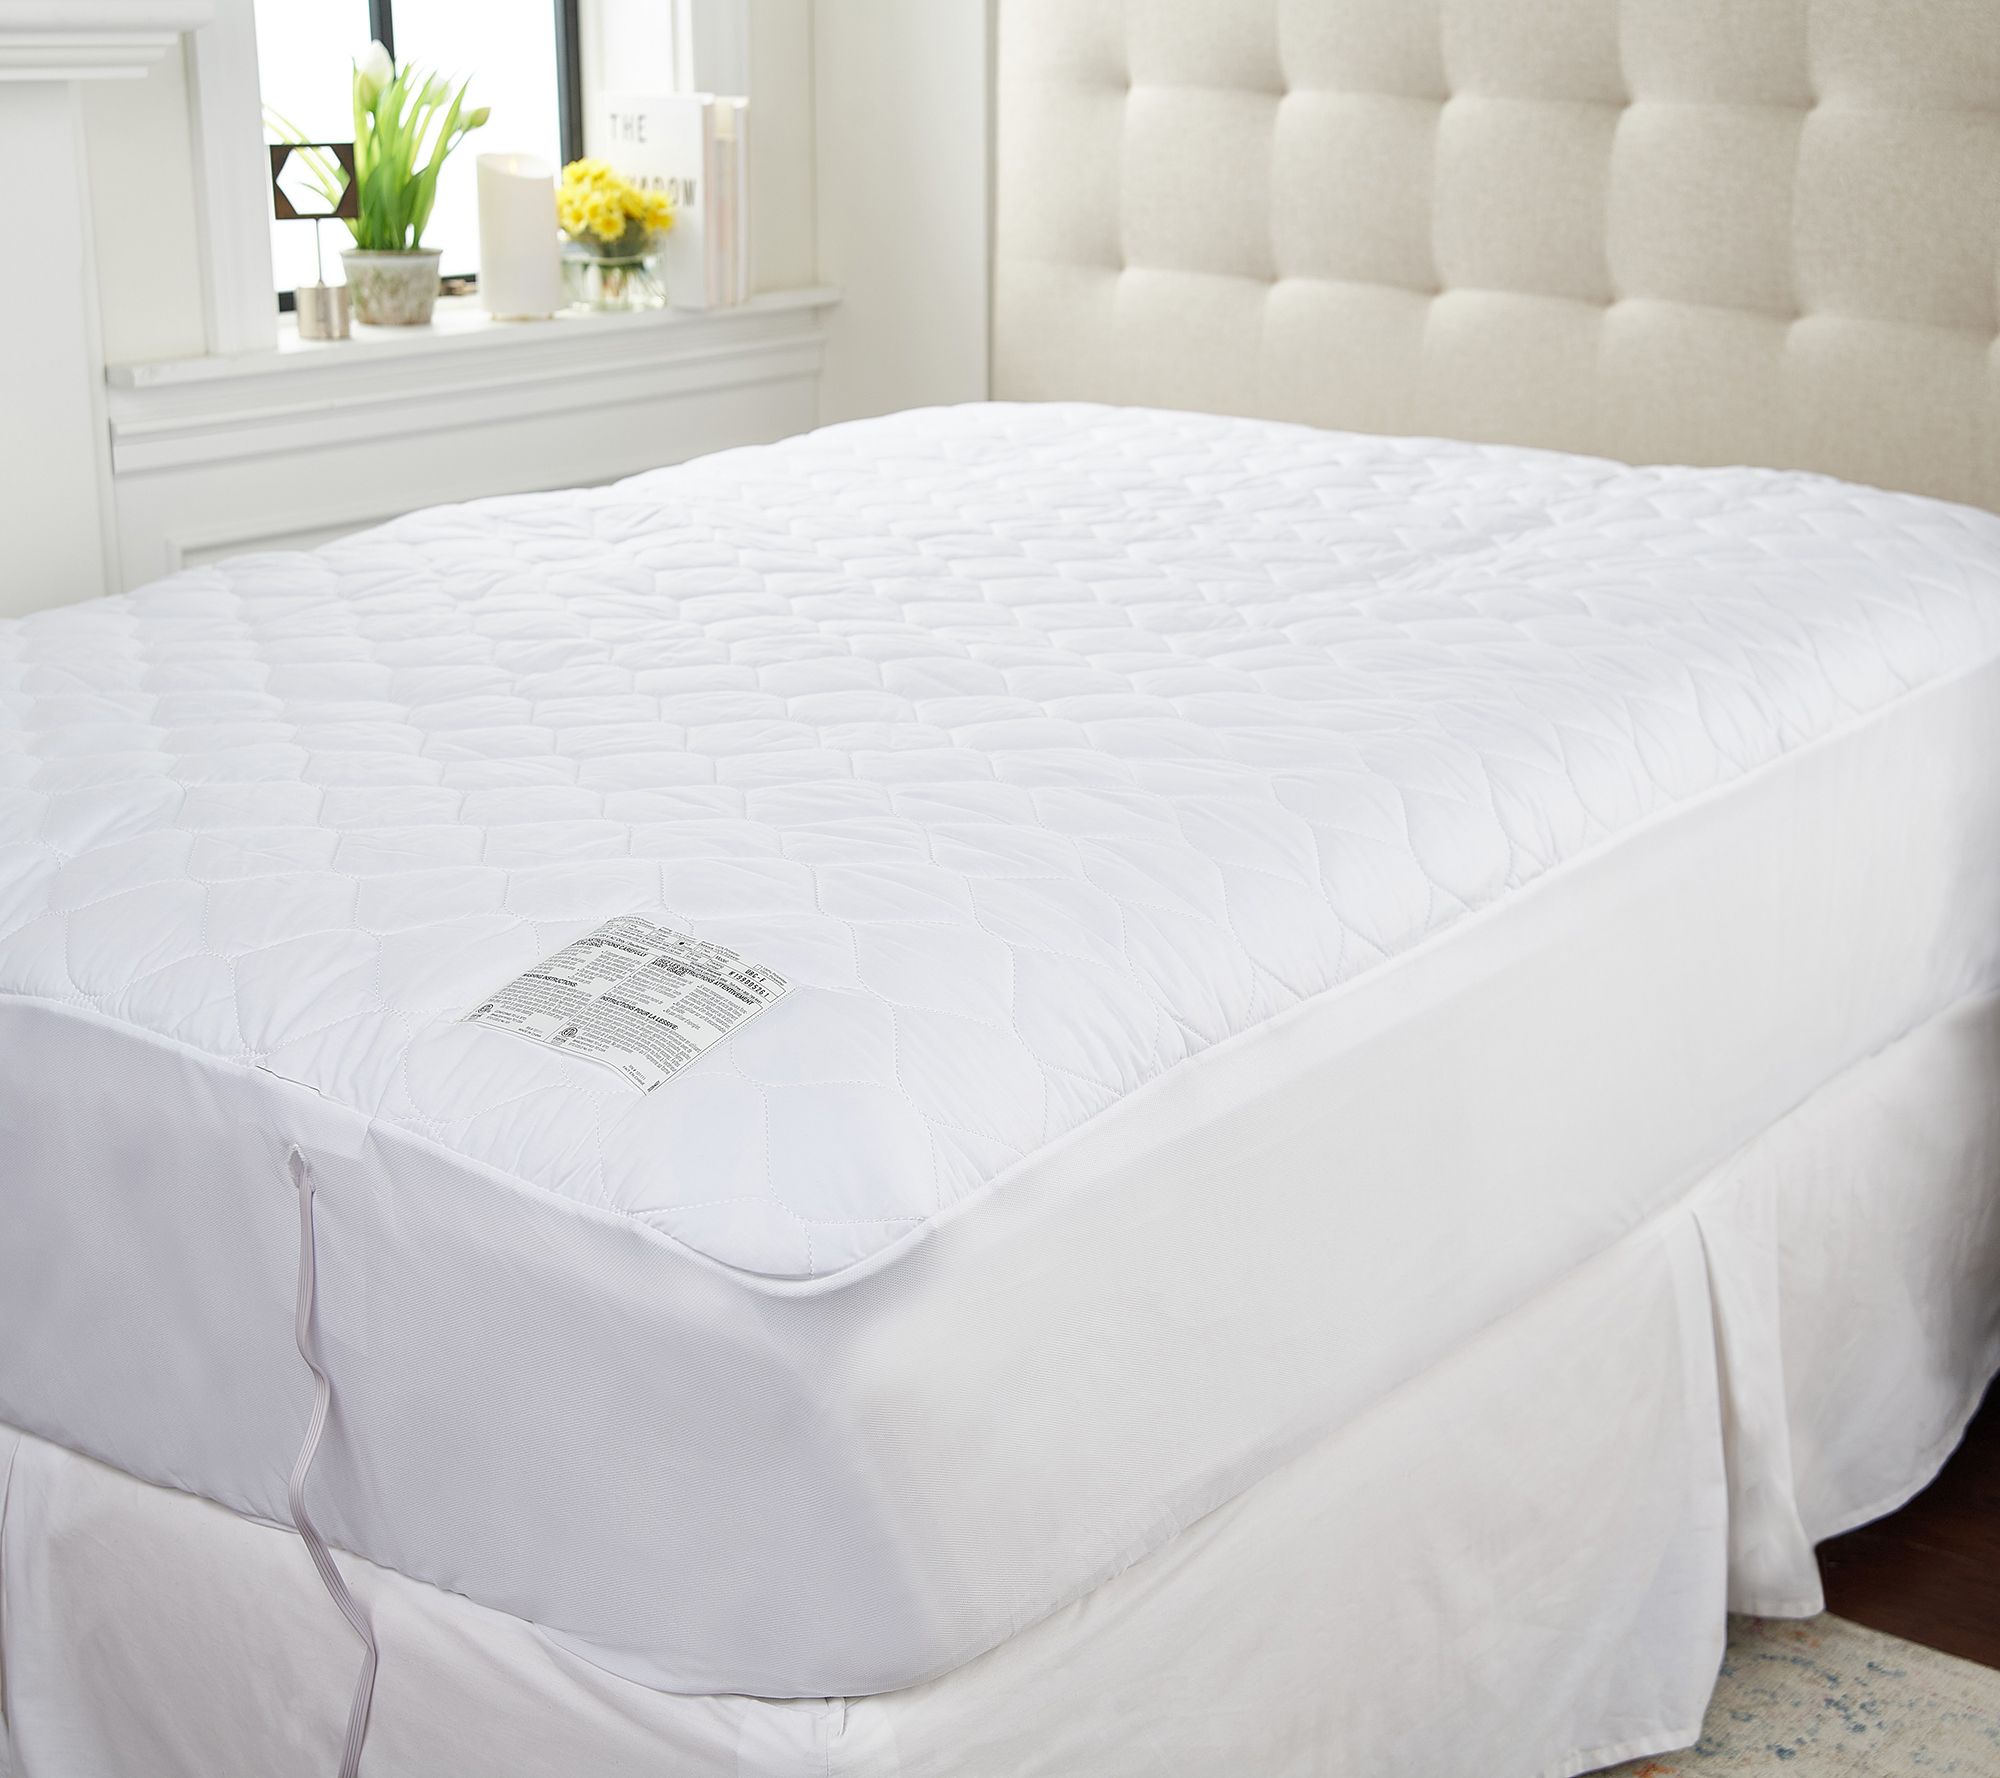 SLEEP COMFORT QUEEN Q BED MATTRESS PROTECTOR QUILTED STRAP FIT COTTON COVER 